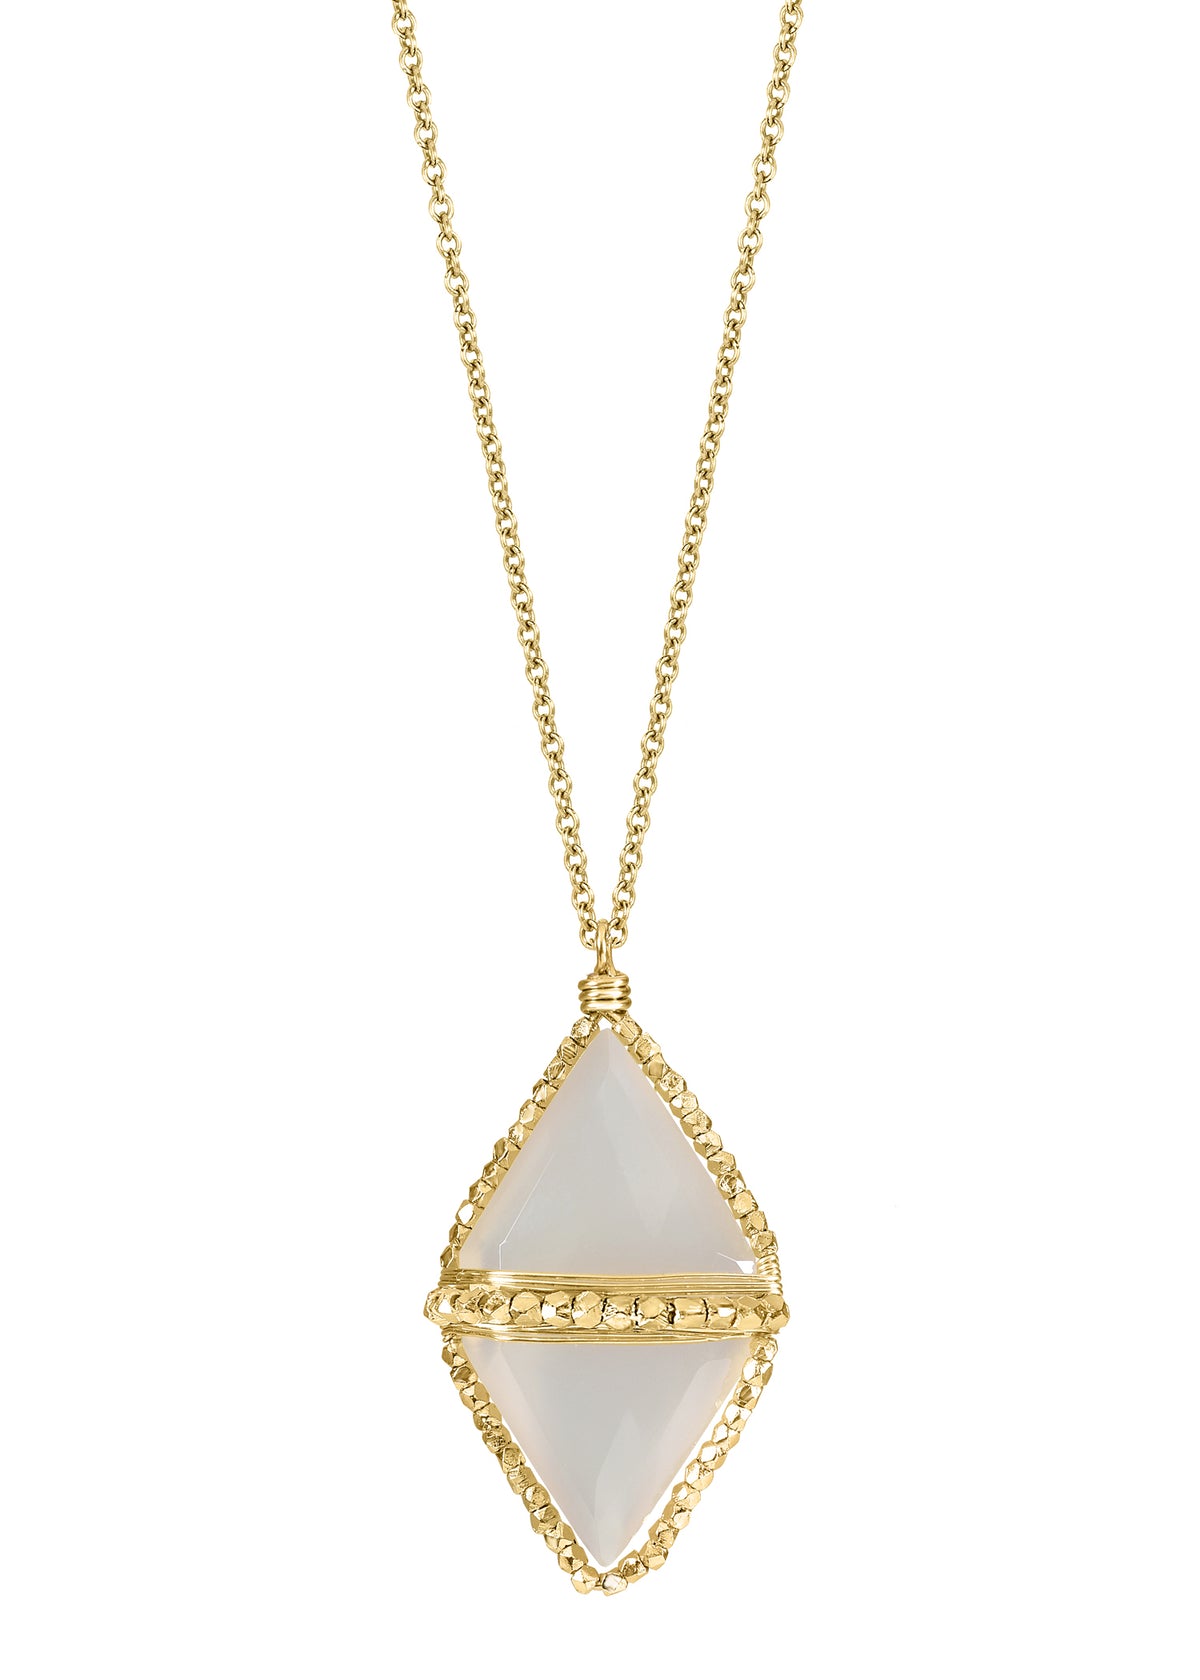 White moonstone 14k gold fill 14k gold vermeil sterling silver beads Necklace measures 22&quot; in length Pendant measures 1&quot; in length and 5/8&quot; in width Handmade in our Los Angeles studio